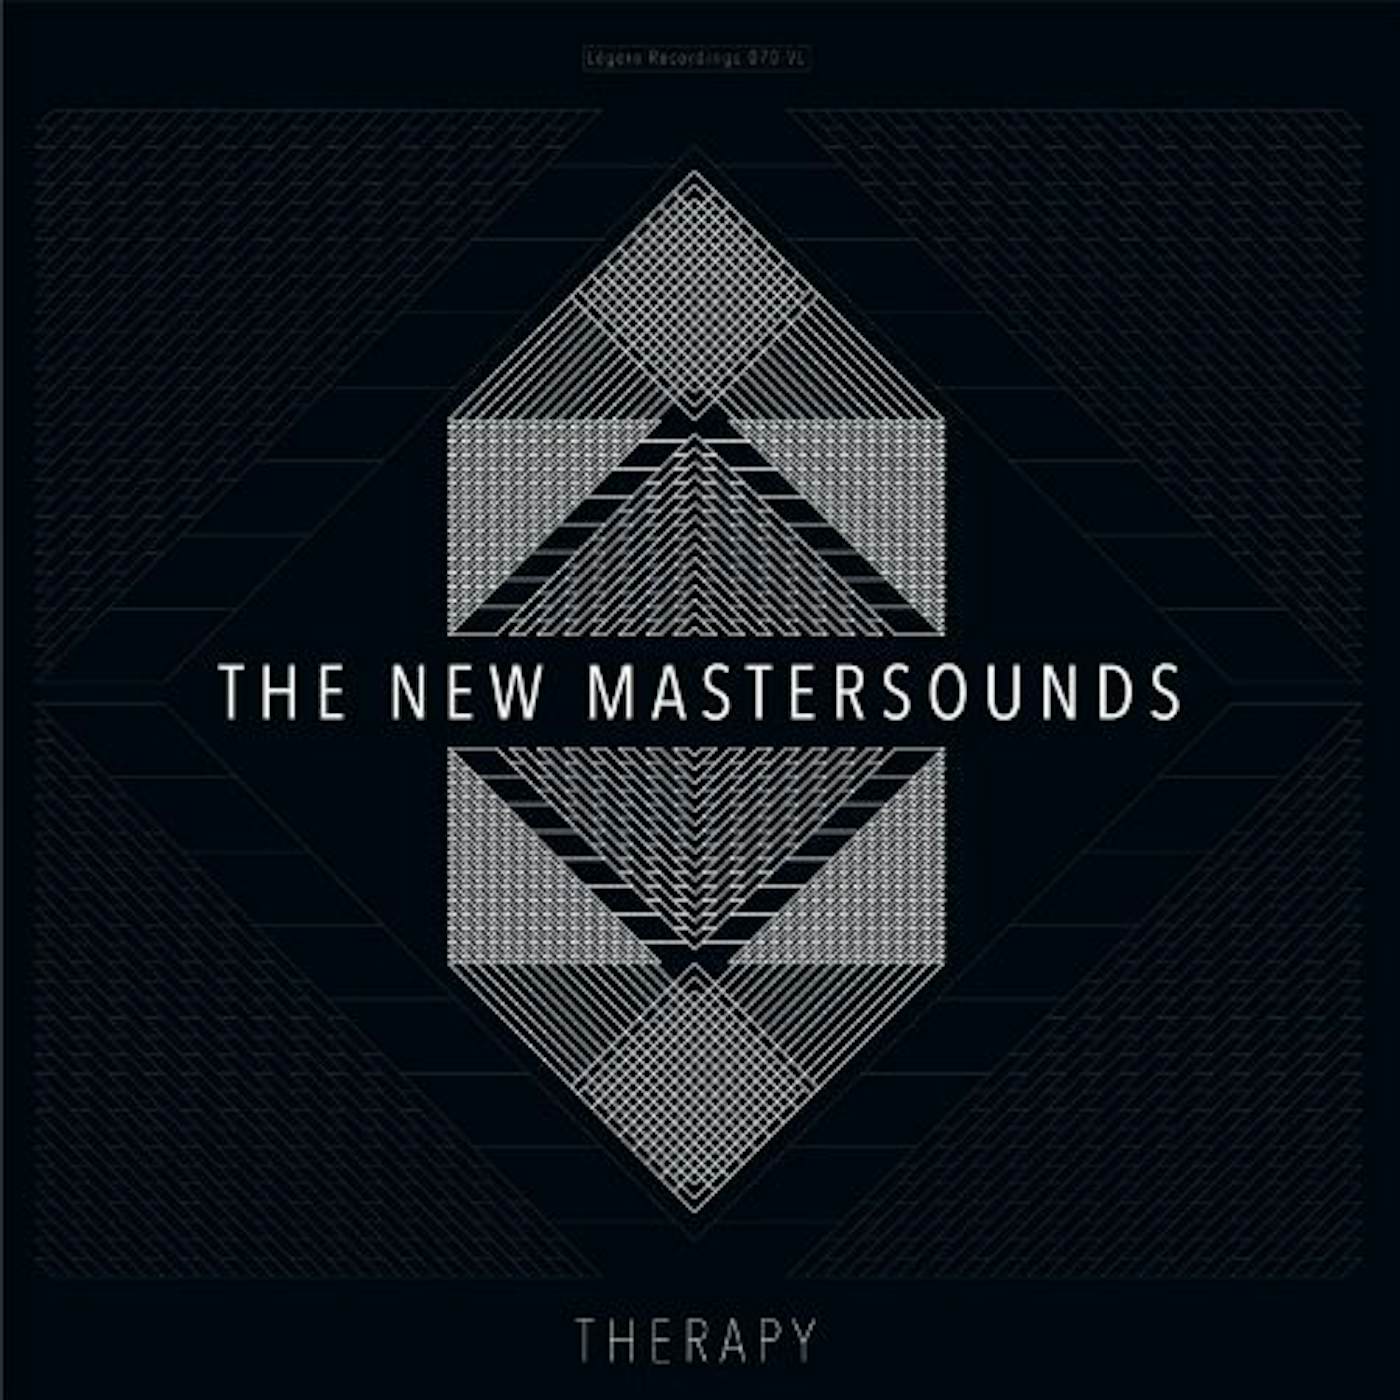 The New Mastersounds THERAPY Vinyl Record